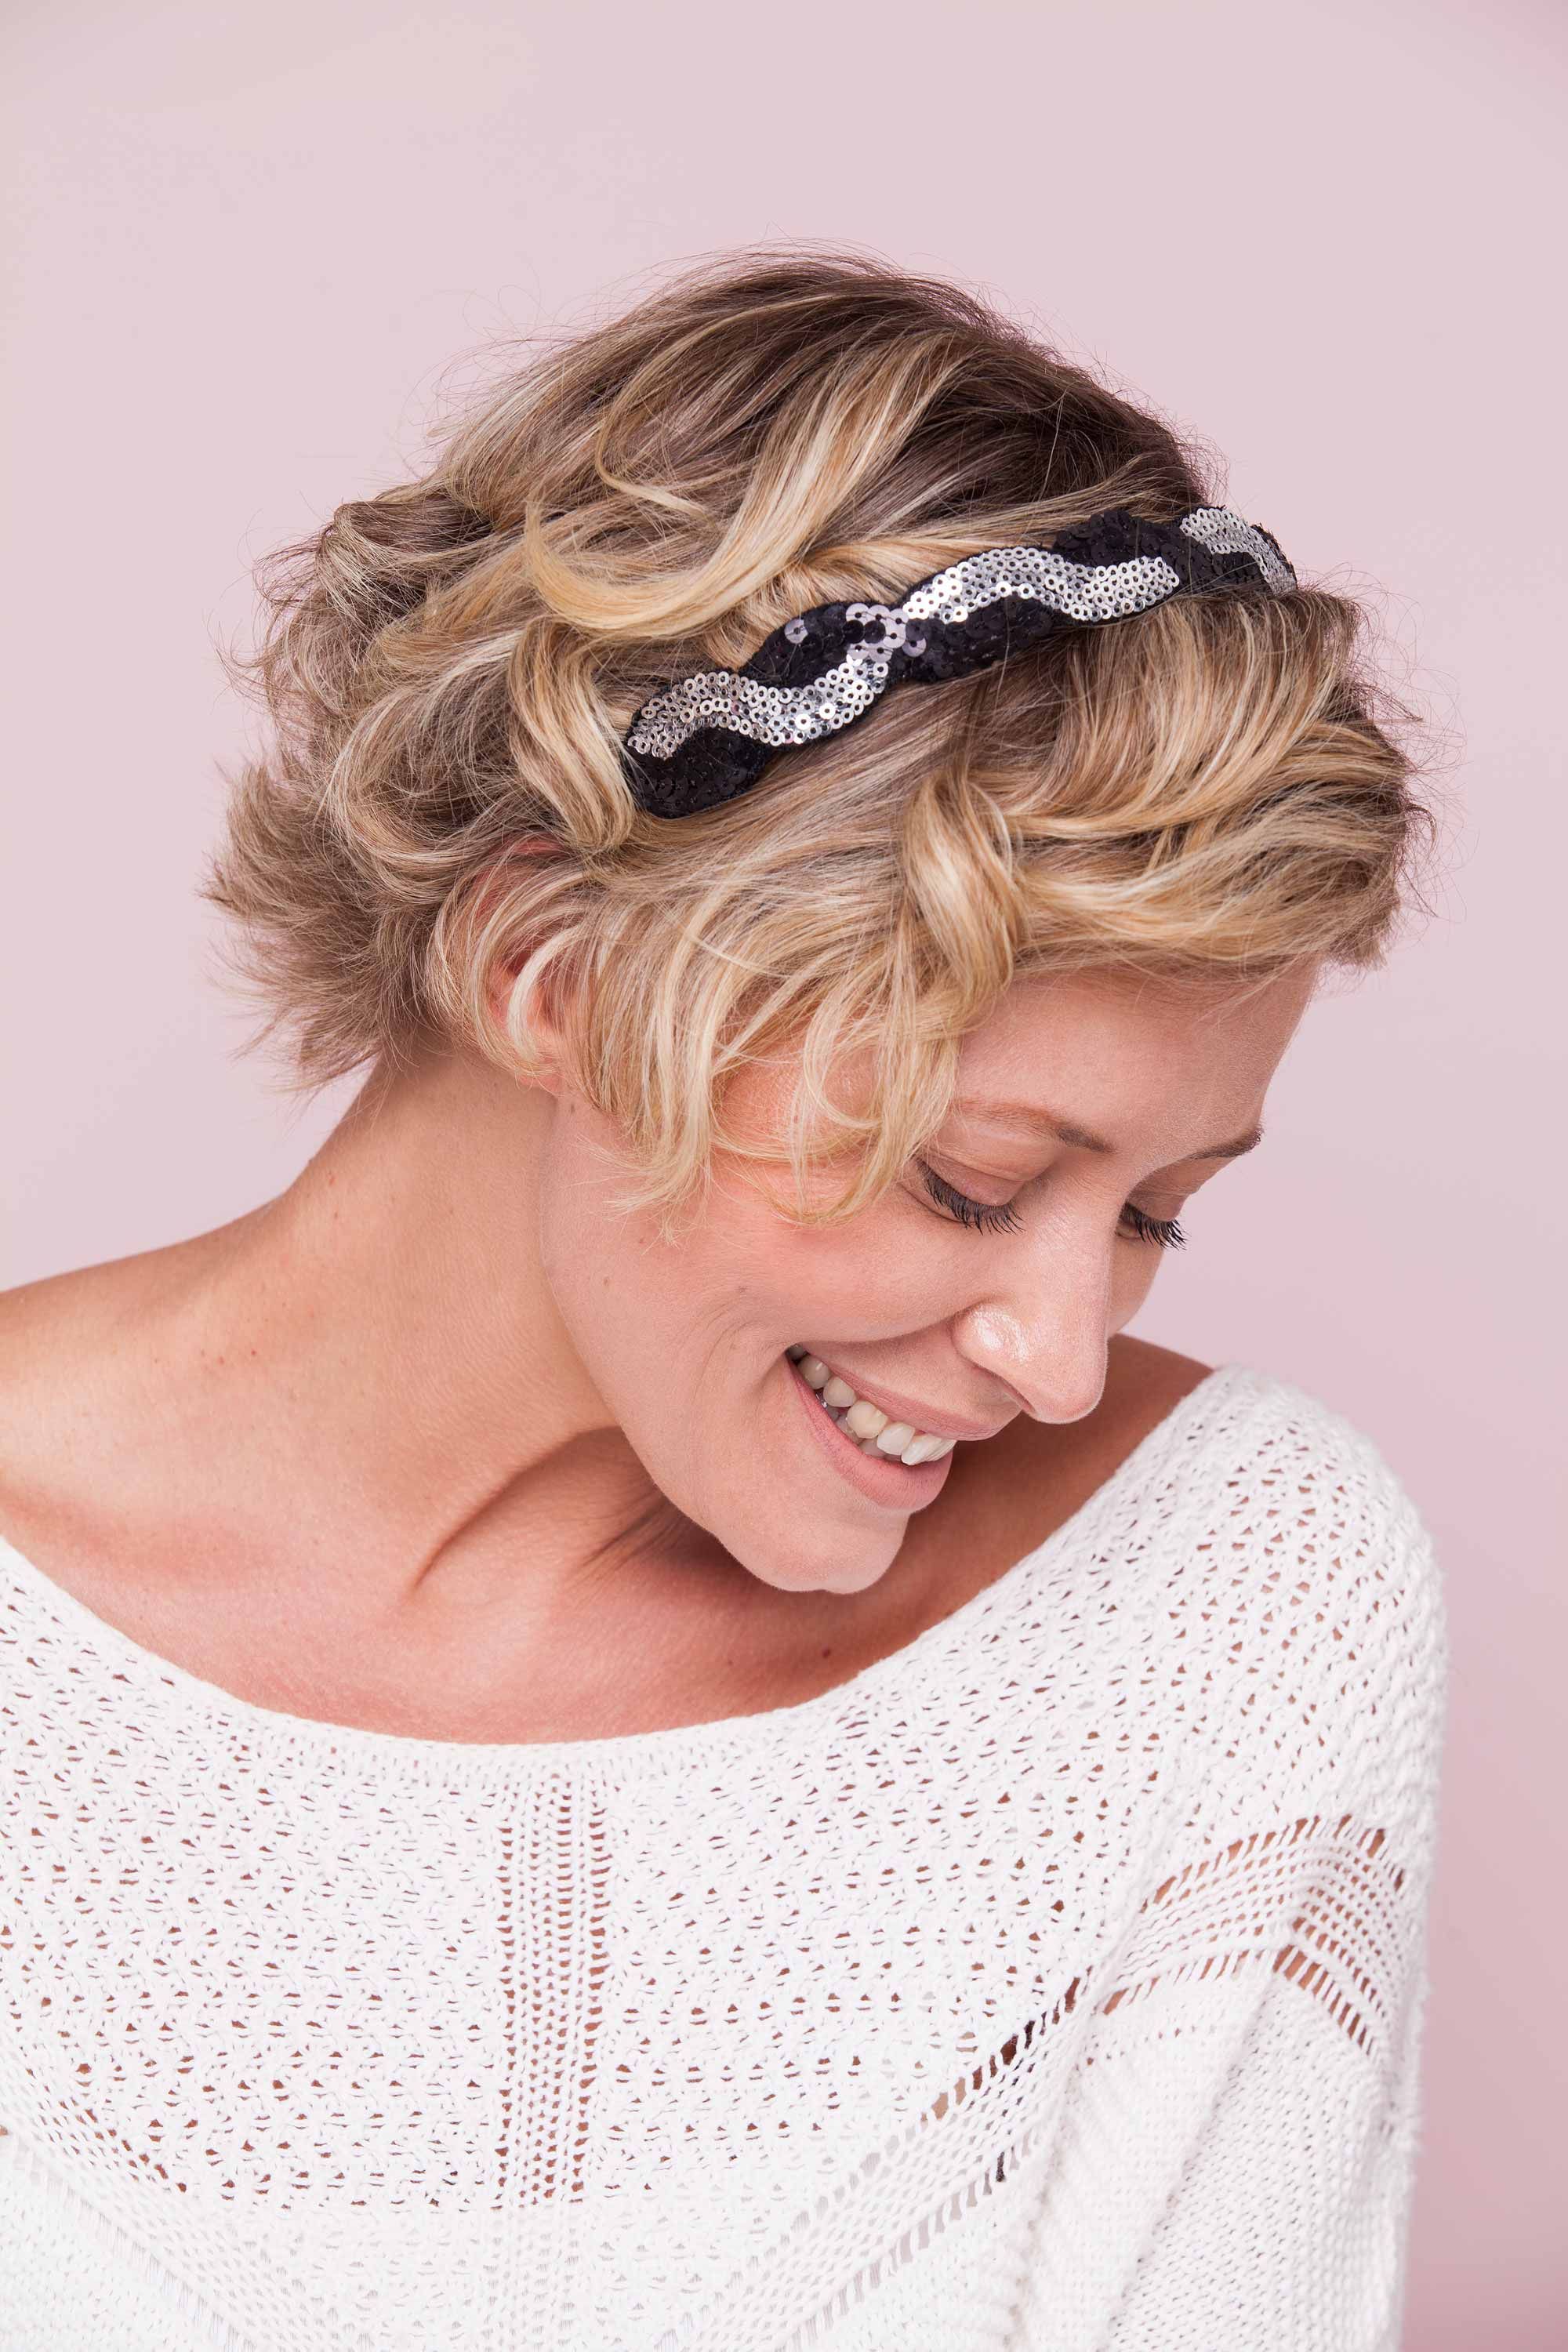 11 Glitzy Wedding Guest Hairstyles For End Of Year Weddings With Hairstyles For Short Hair For Wedding Guest (View 25 of 25)